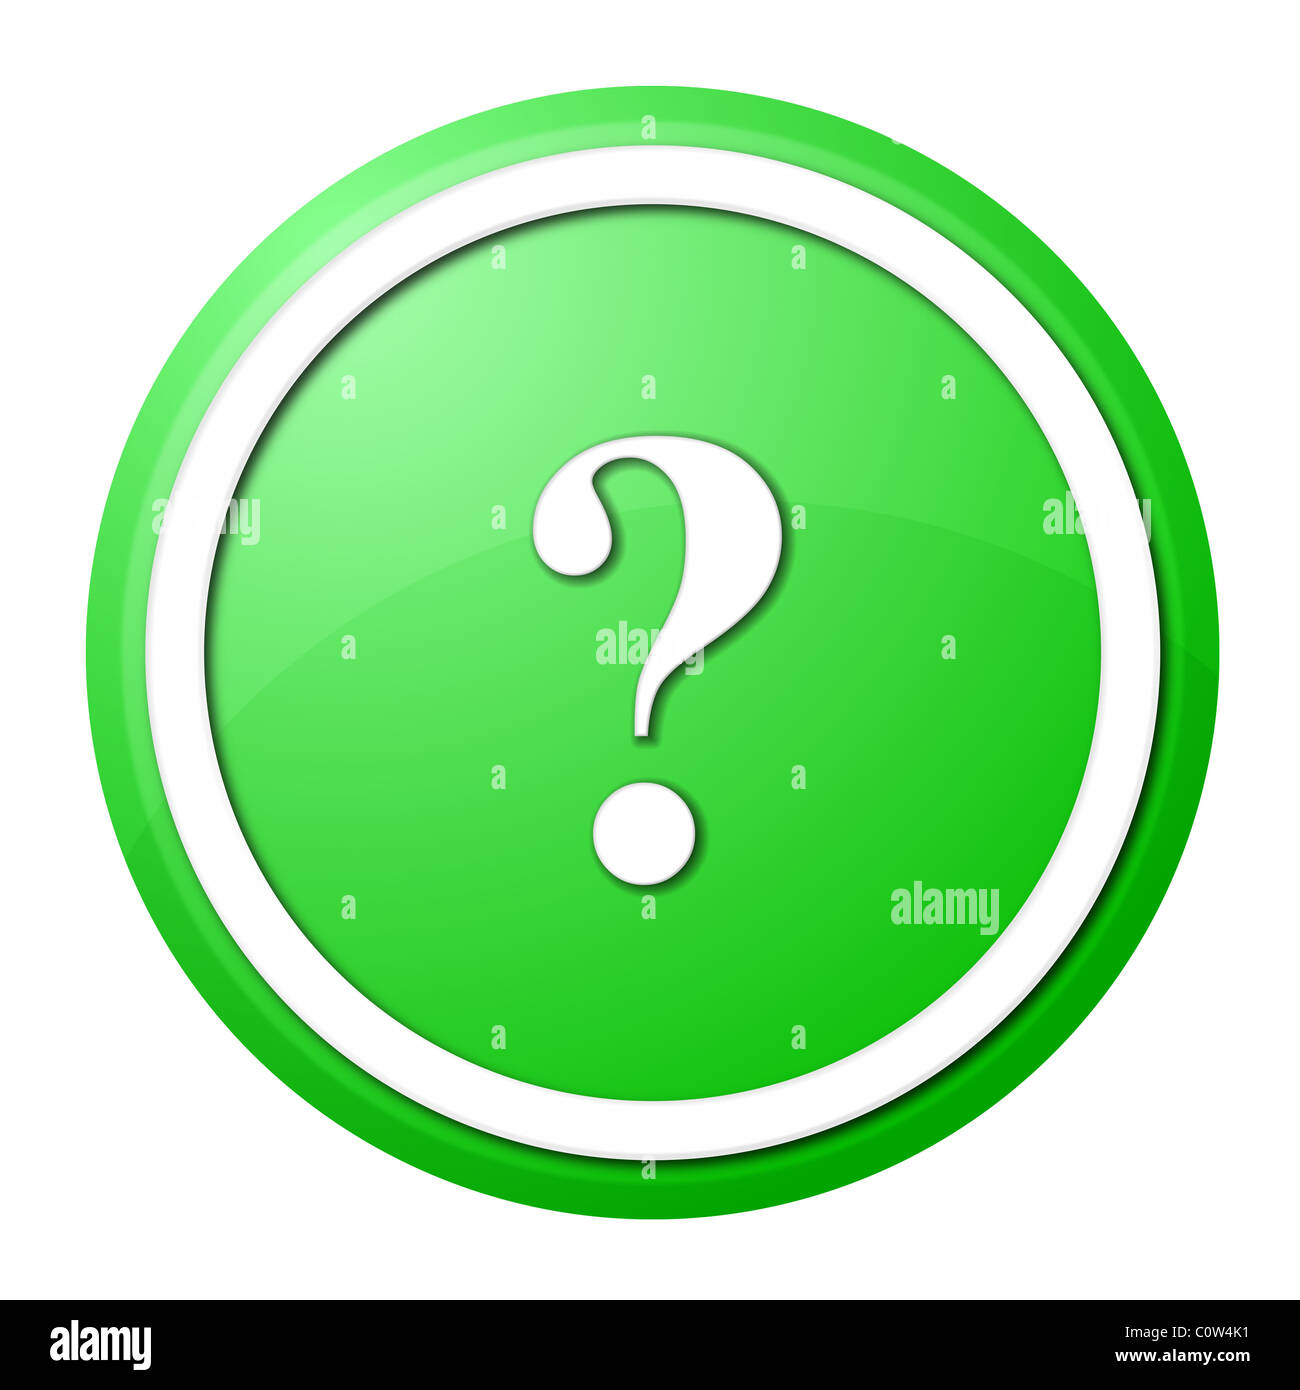 round question mark button Stock Photo